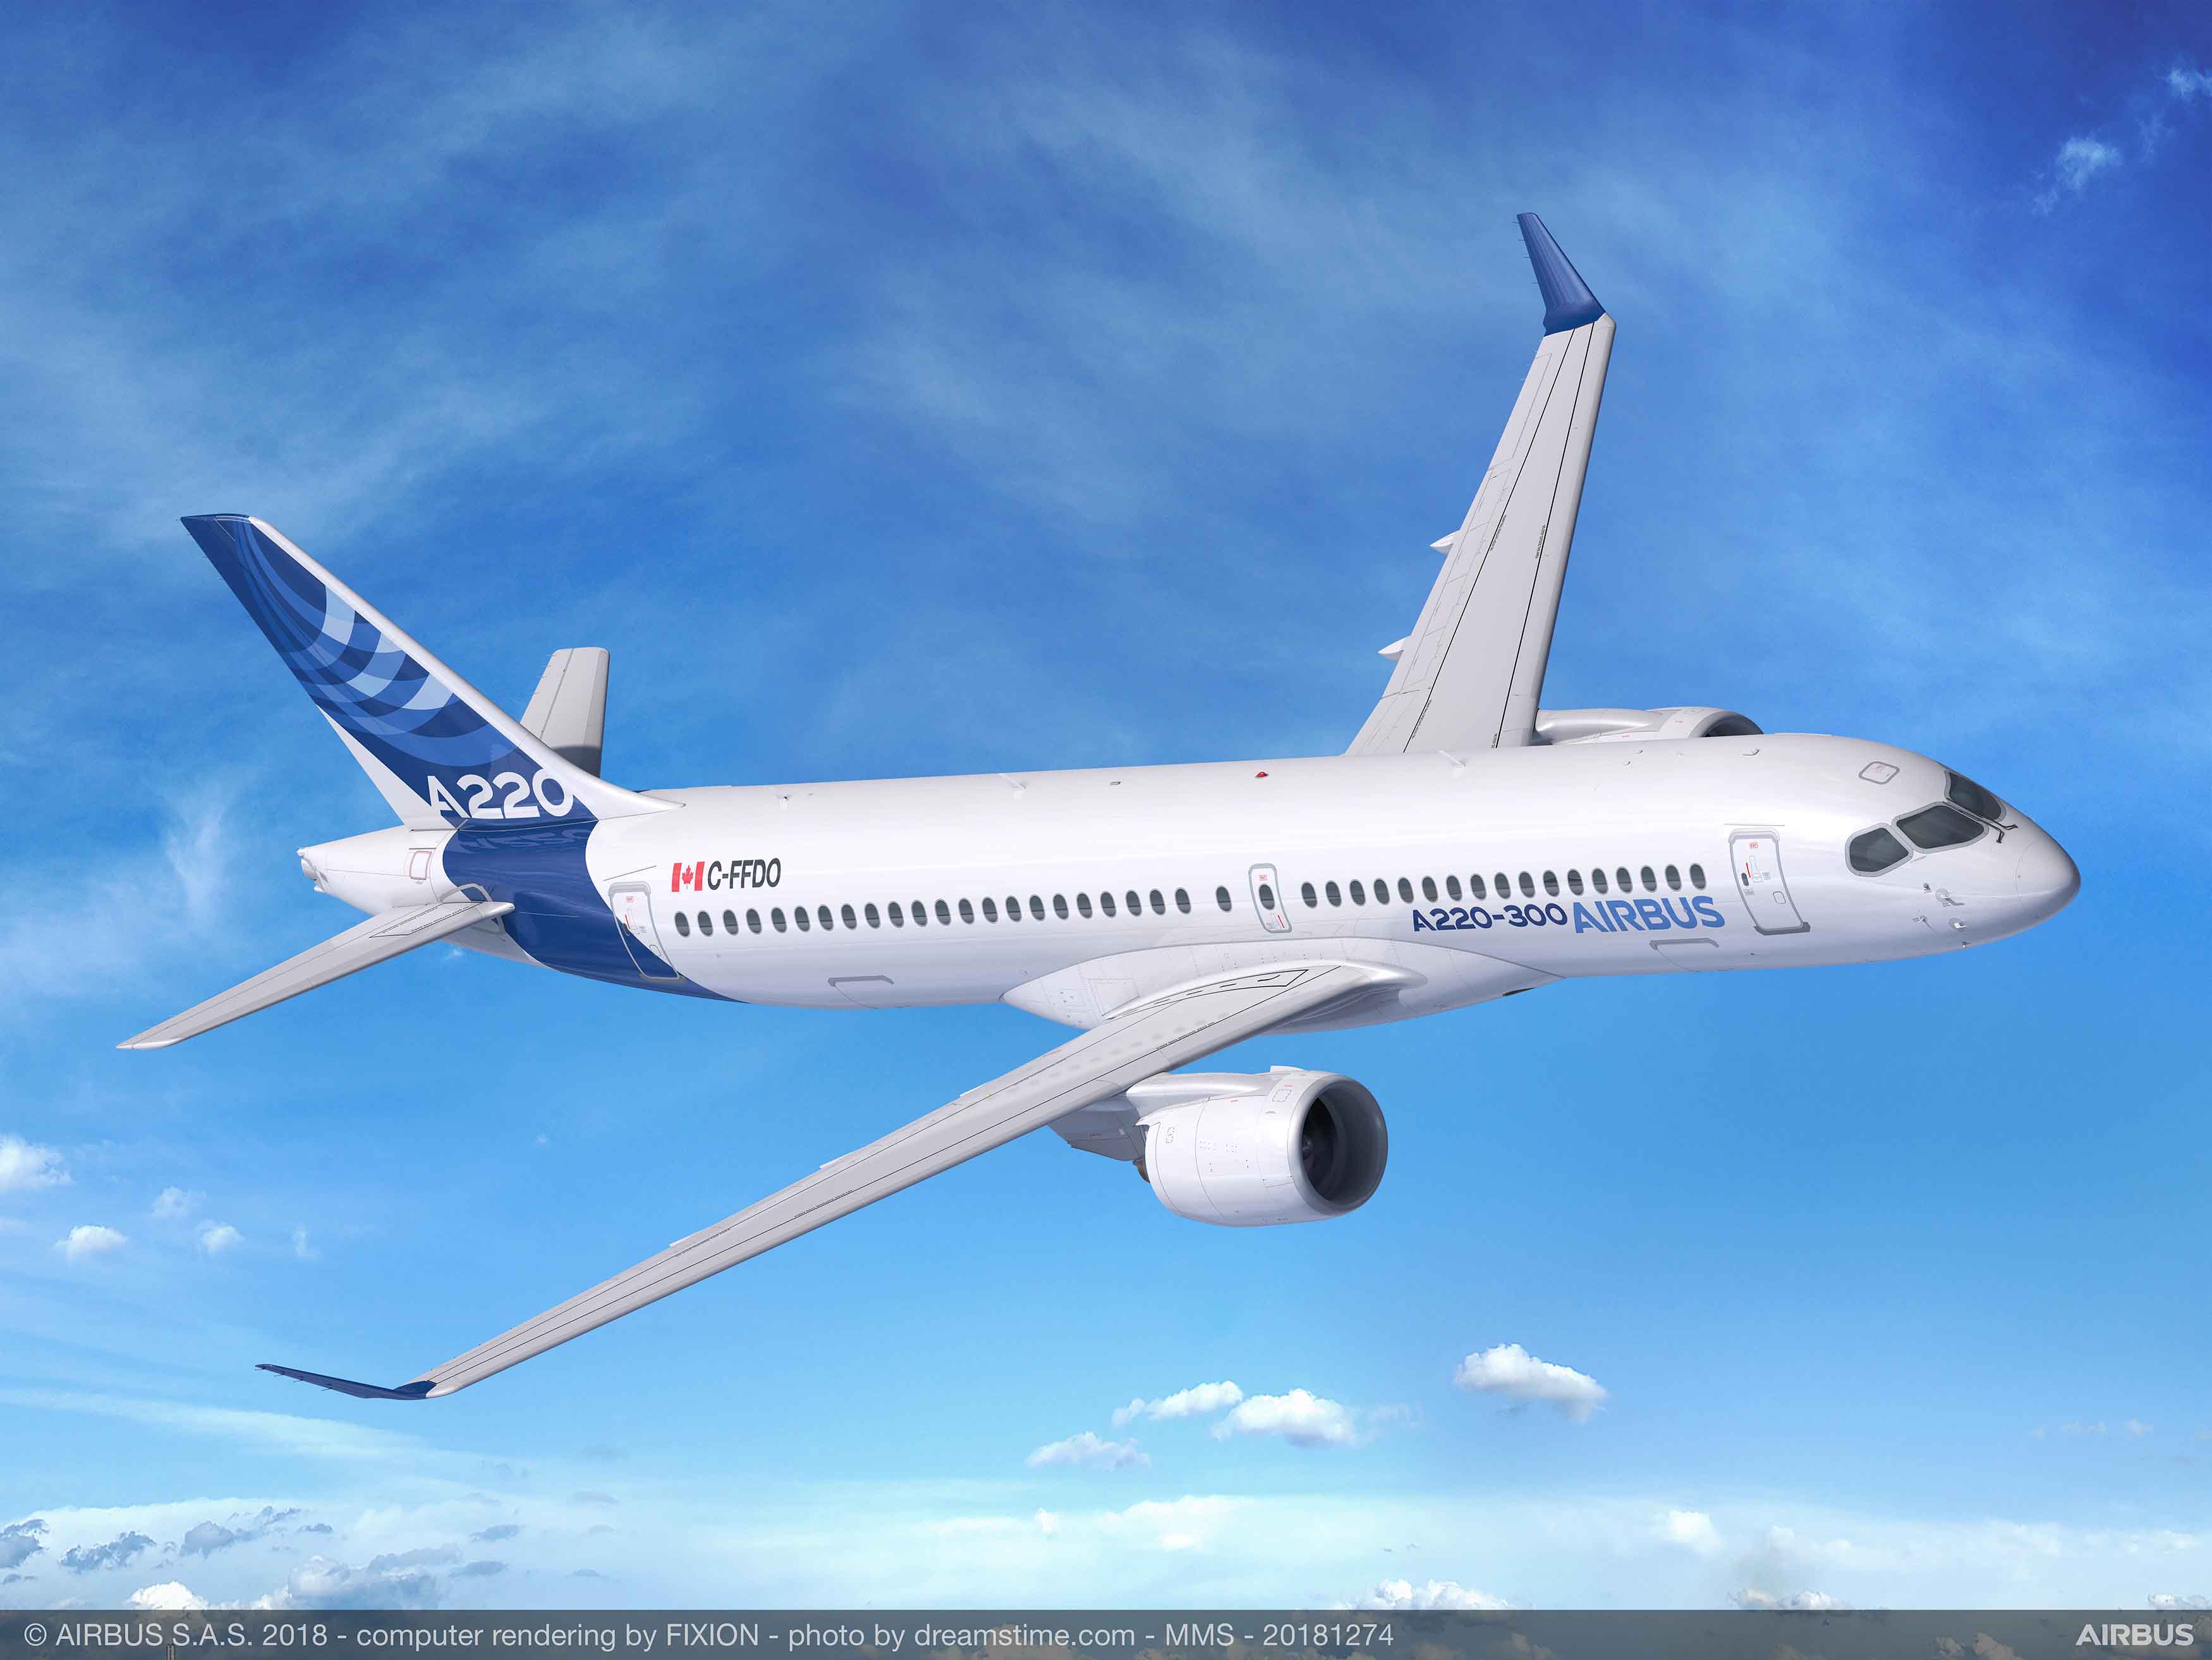 Farnborough: Unnamed US Airline Orders 60 A220s